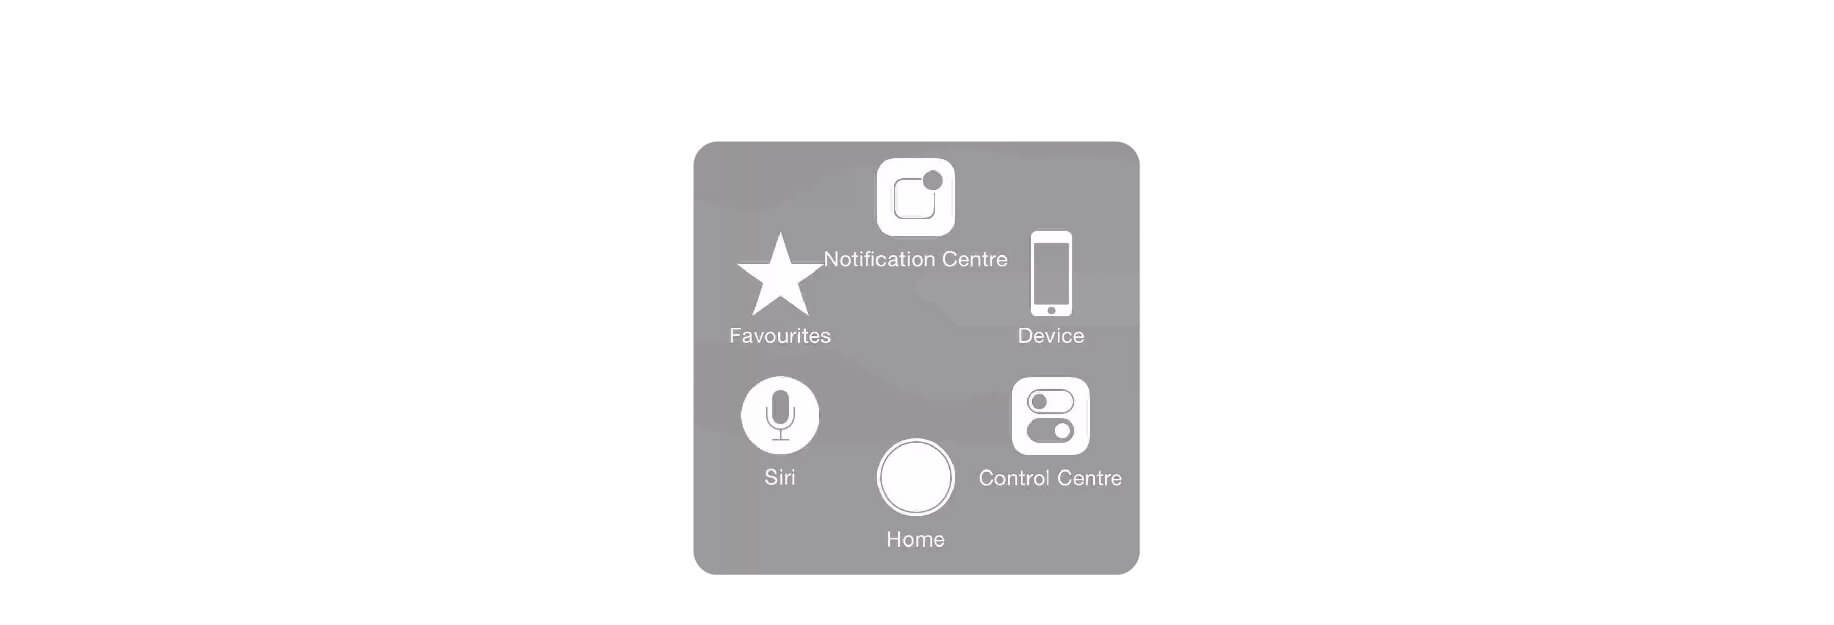 Home button not working on iPhone or iPad?